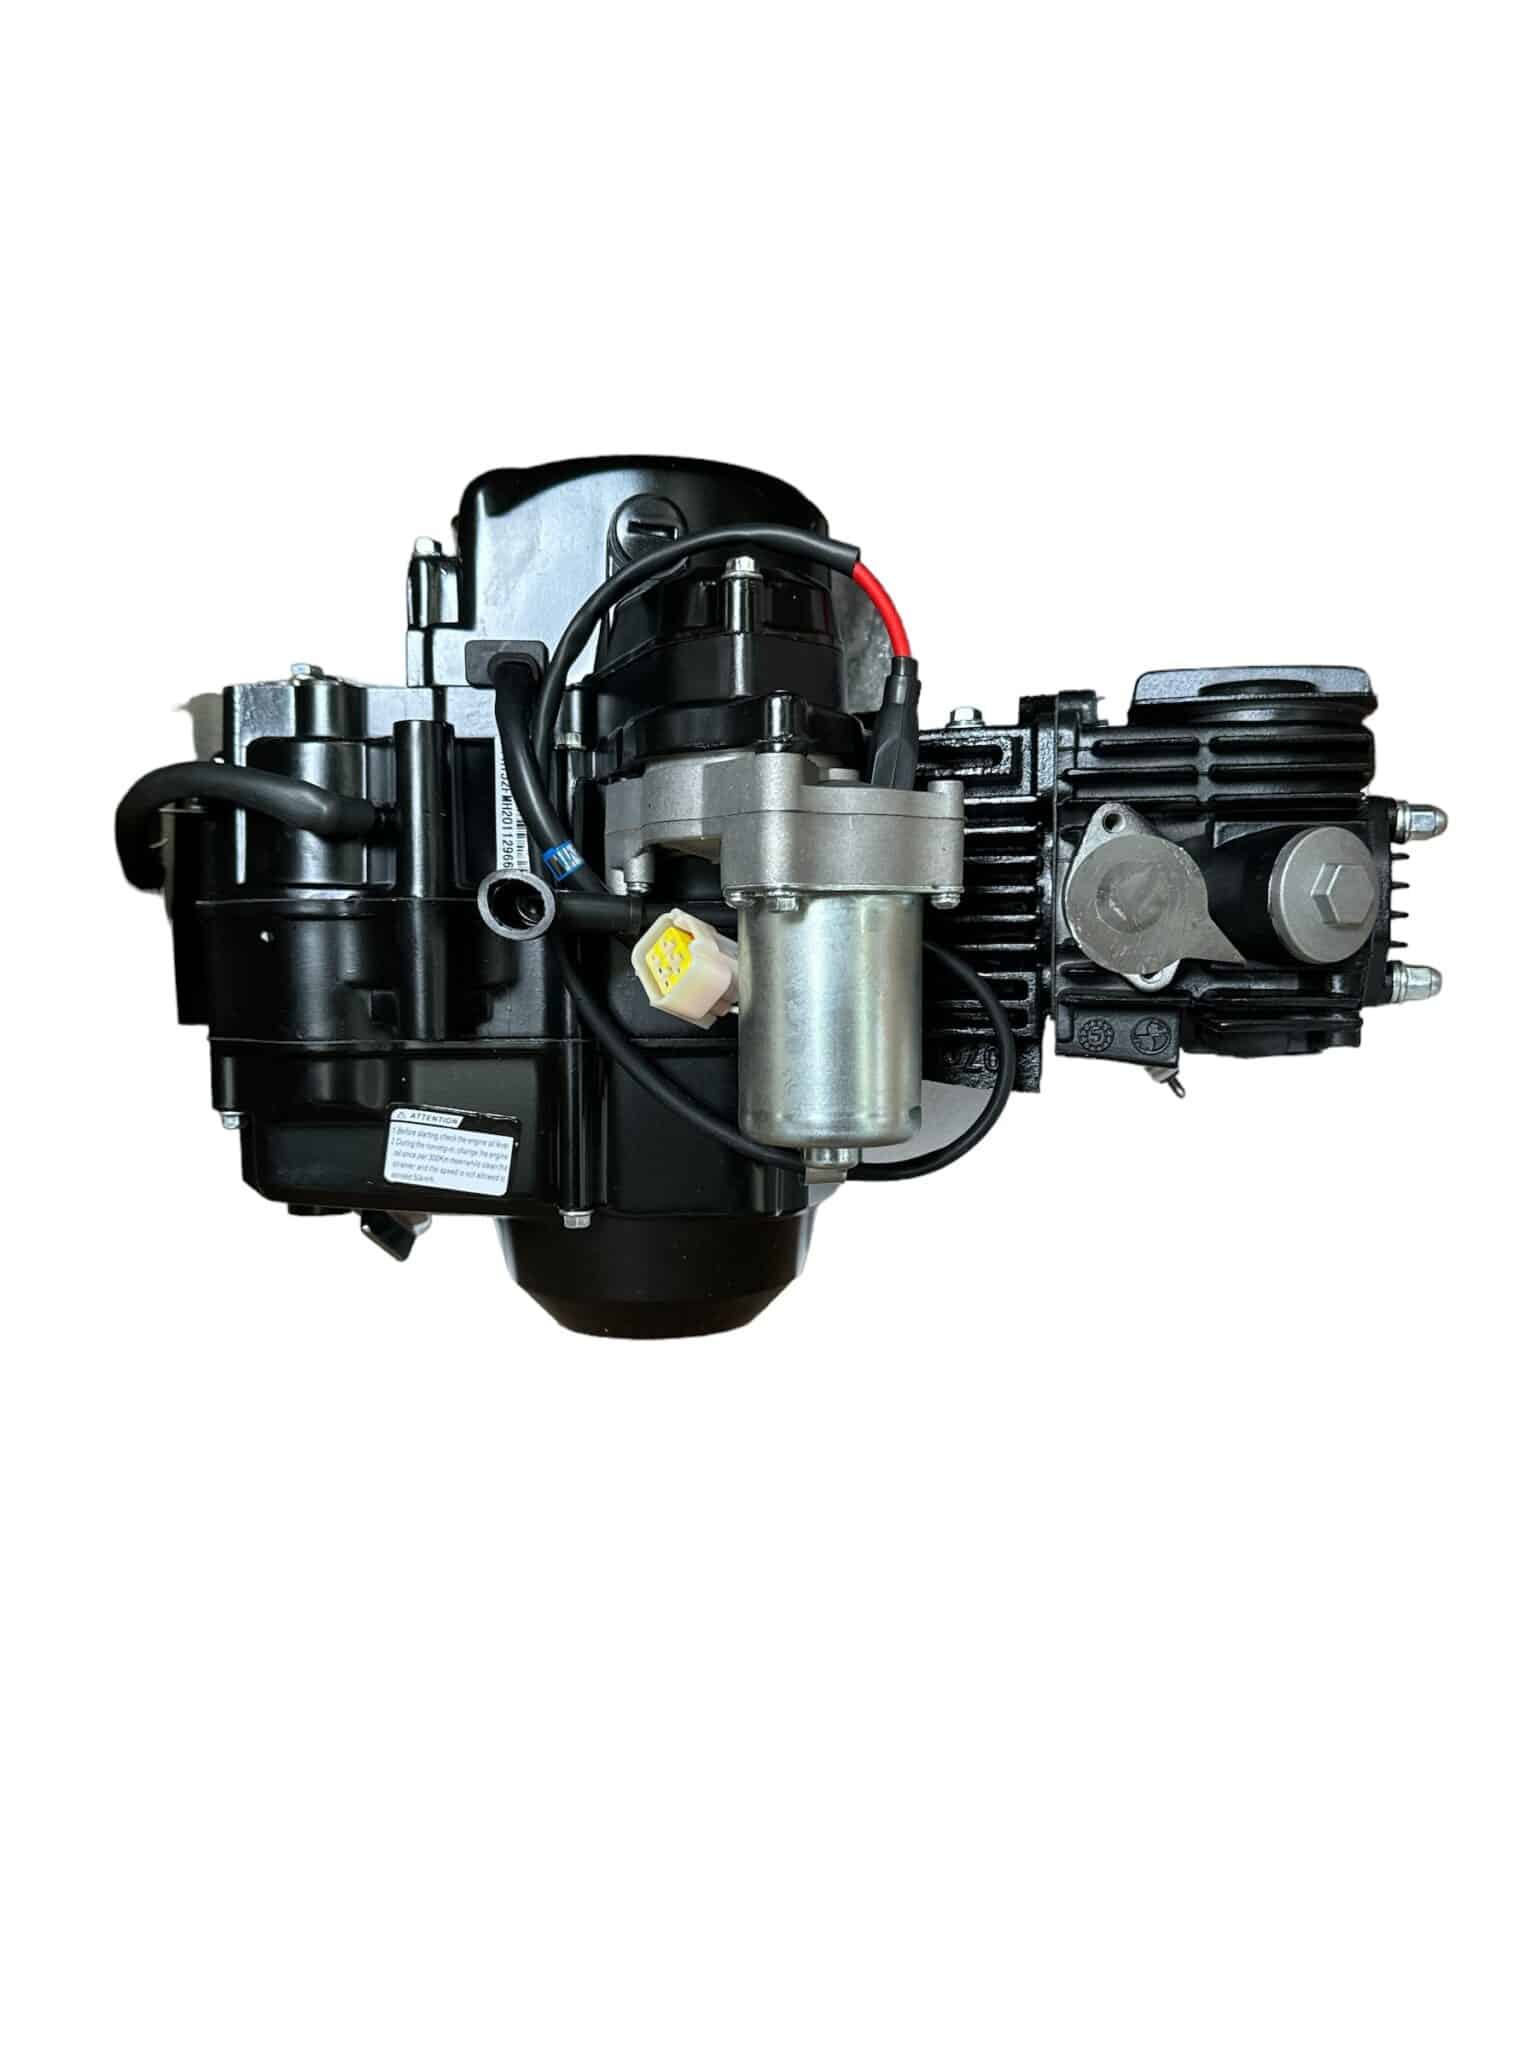 ENGINE (ENG-18) (FDJ-AS009) 110cc 4-stroke Engine with Automatic